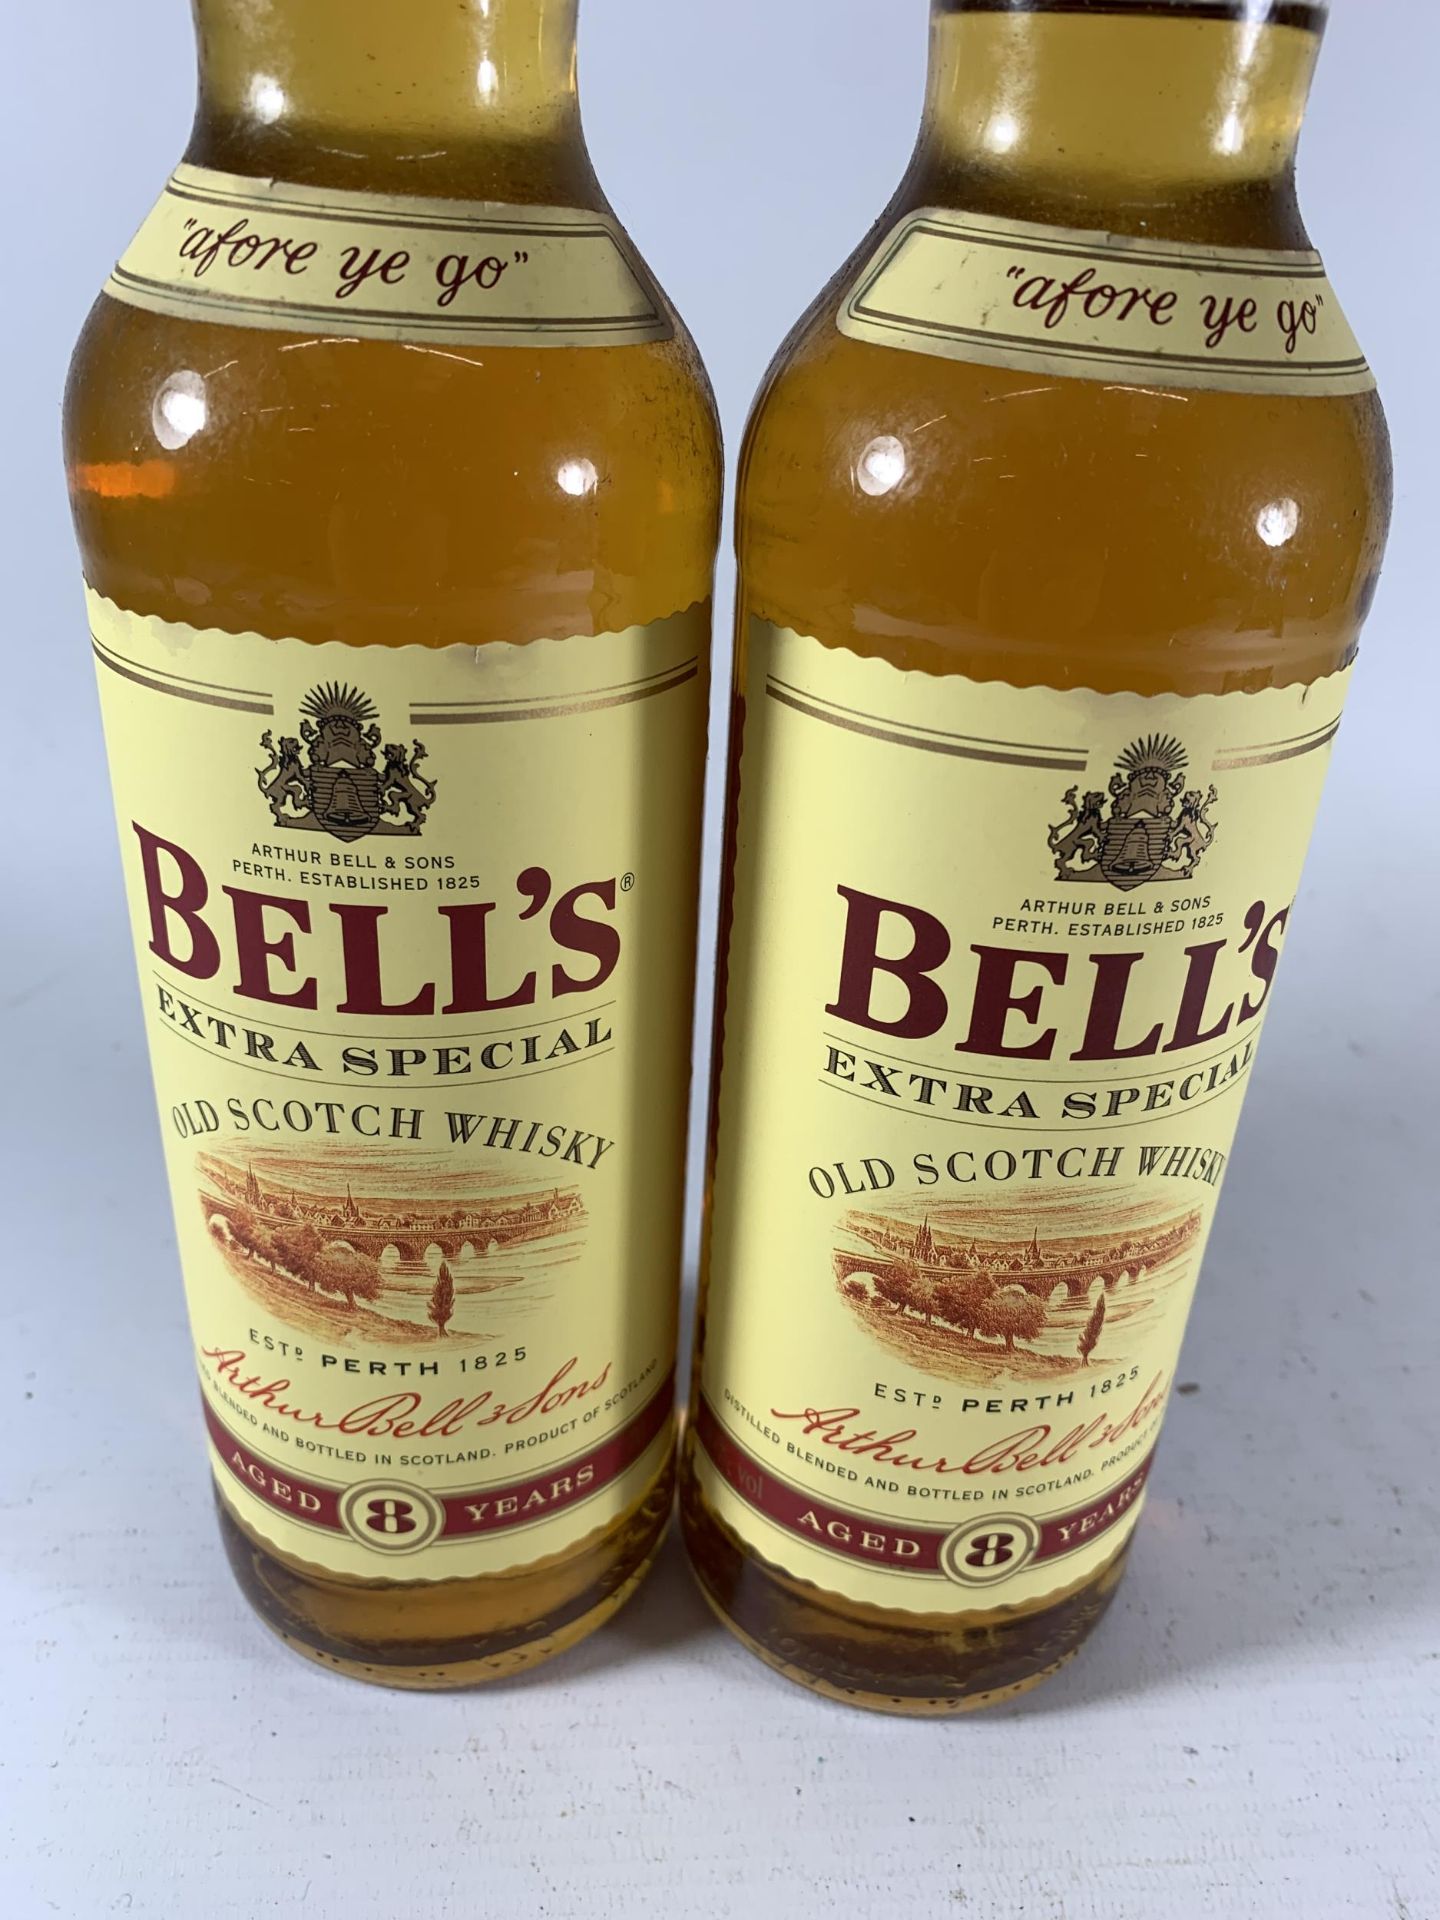 2 X 70CL BOTTLE - BELL'S EXTRA SPECIAL AGED 8 YEARS OLD SCOTCH WHISKY - Image 2 of 3